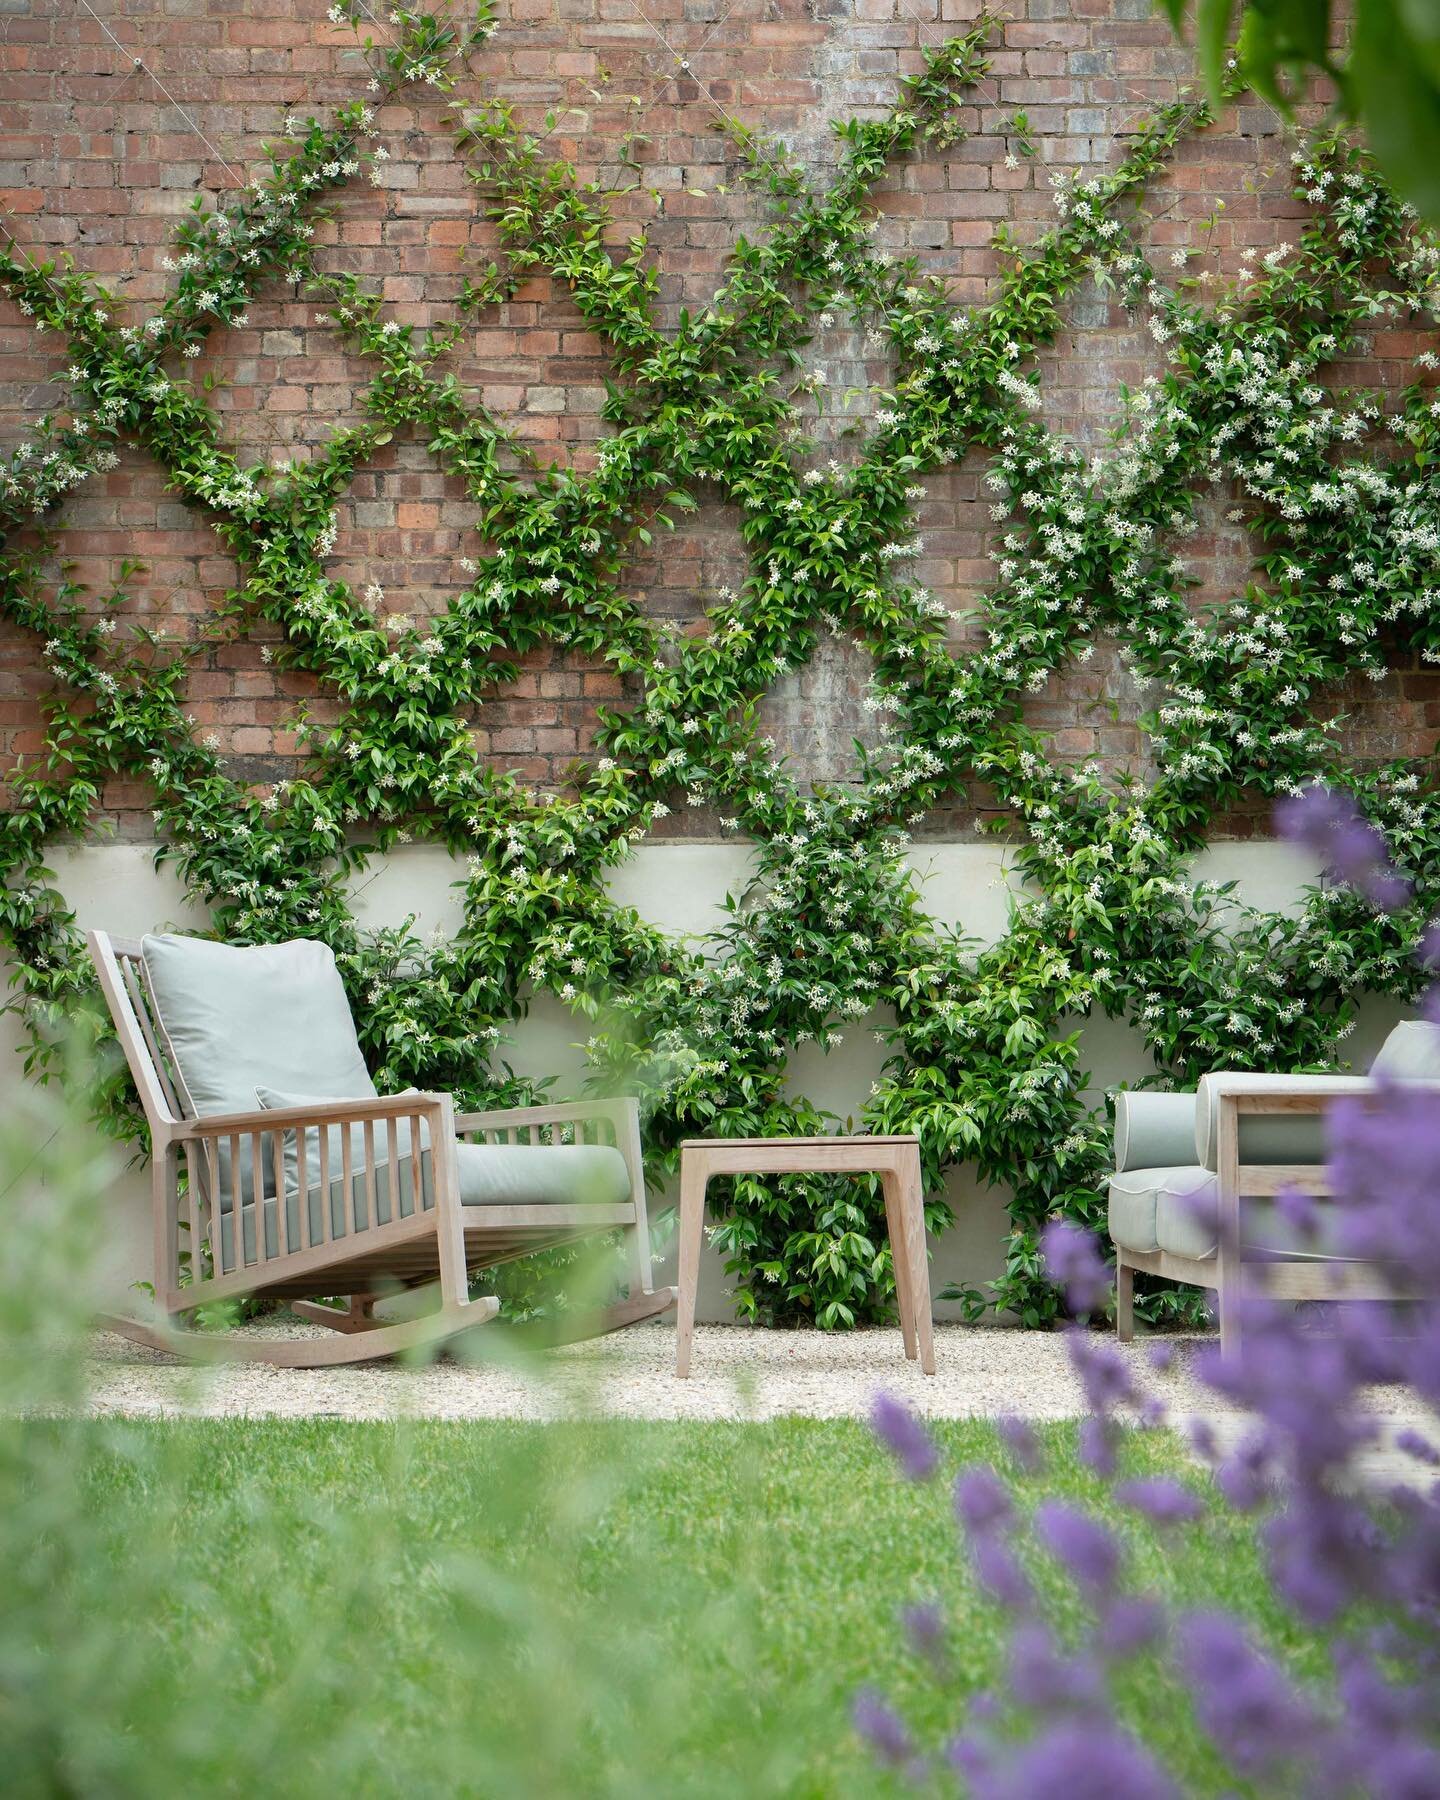 Exciting visit to meet @raewarne photographing our De Beauvoir Square project this weekend. The jasmine lattice was flowering and smelling beautiful along with the lavender, and the clematis blooming at the top of the heptacodium tree as we had hoped